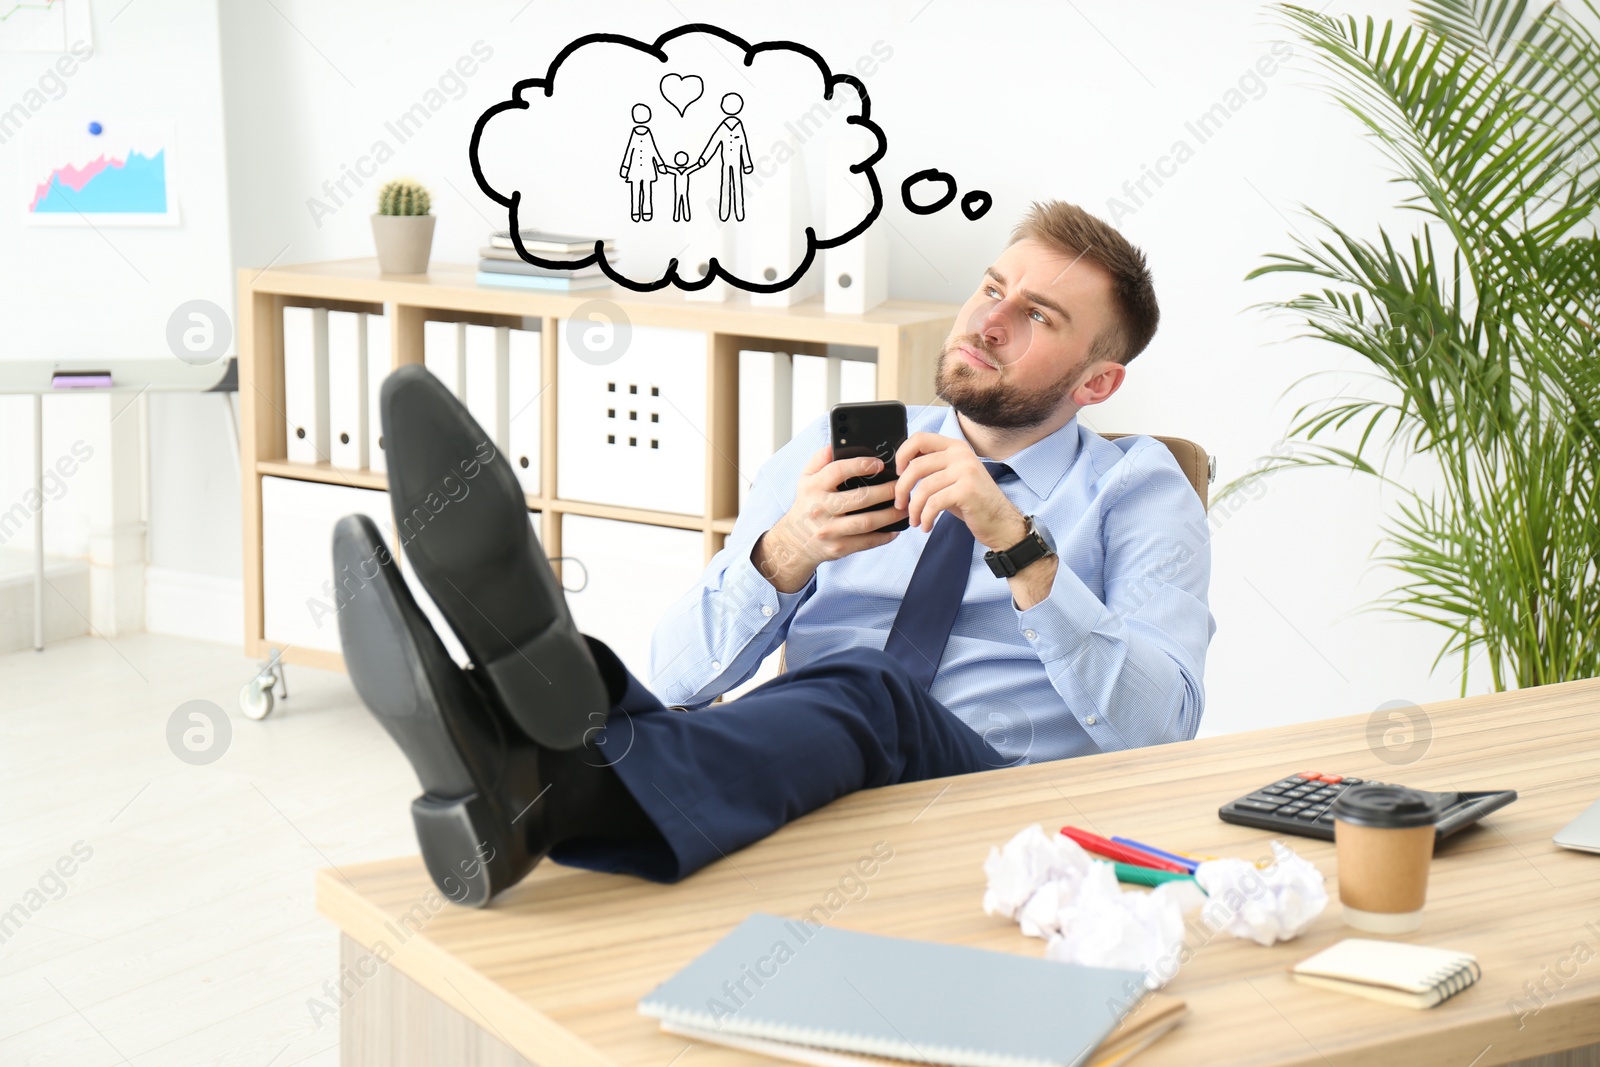 Image of Businessman dreaming about family in office. Concept of balance between life and work